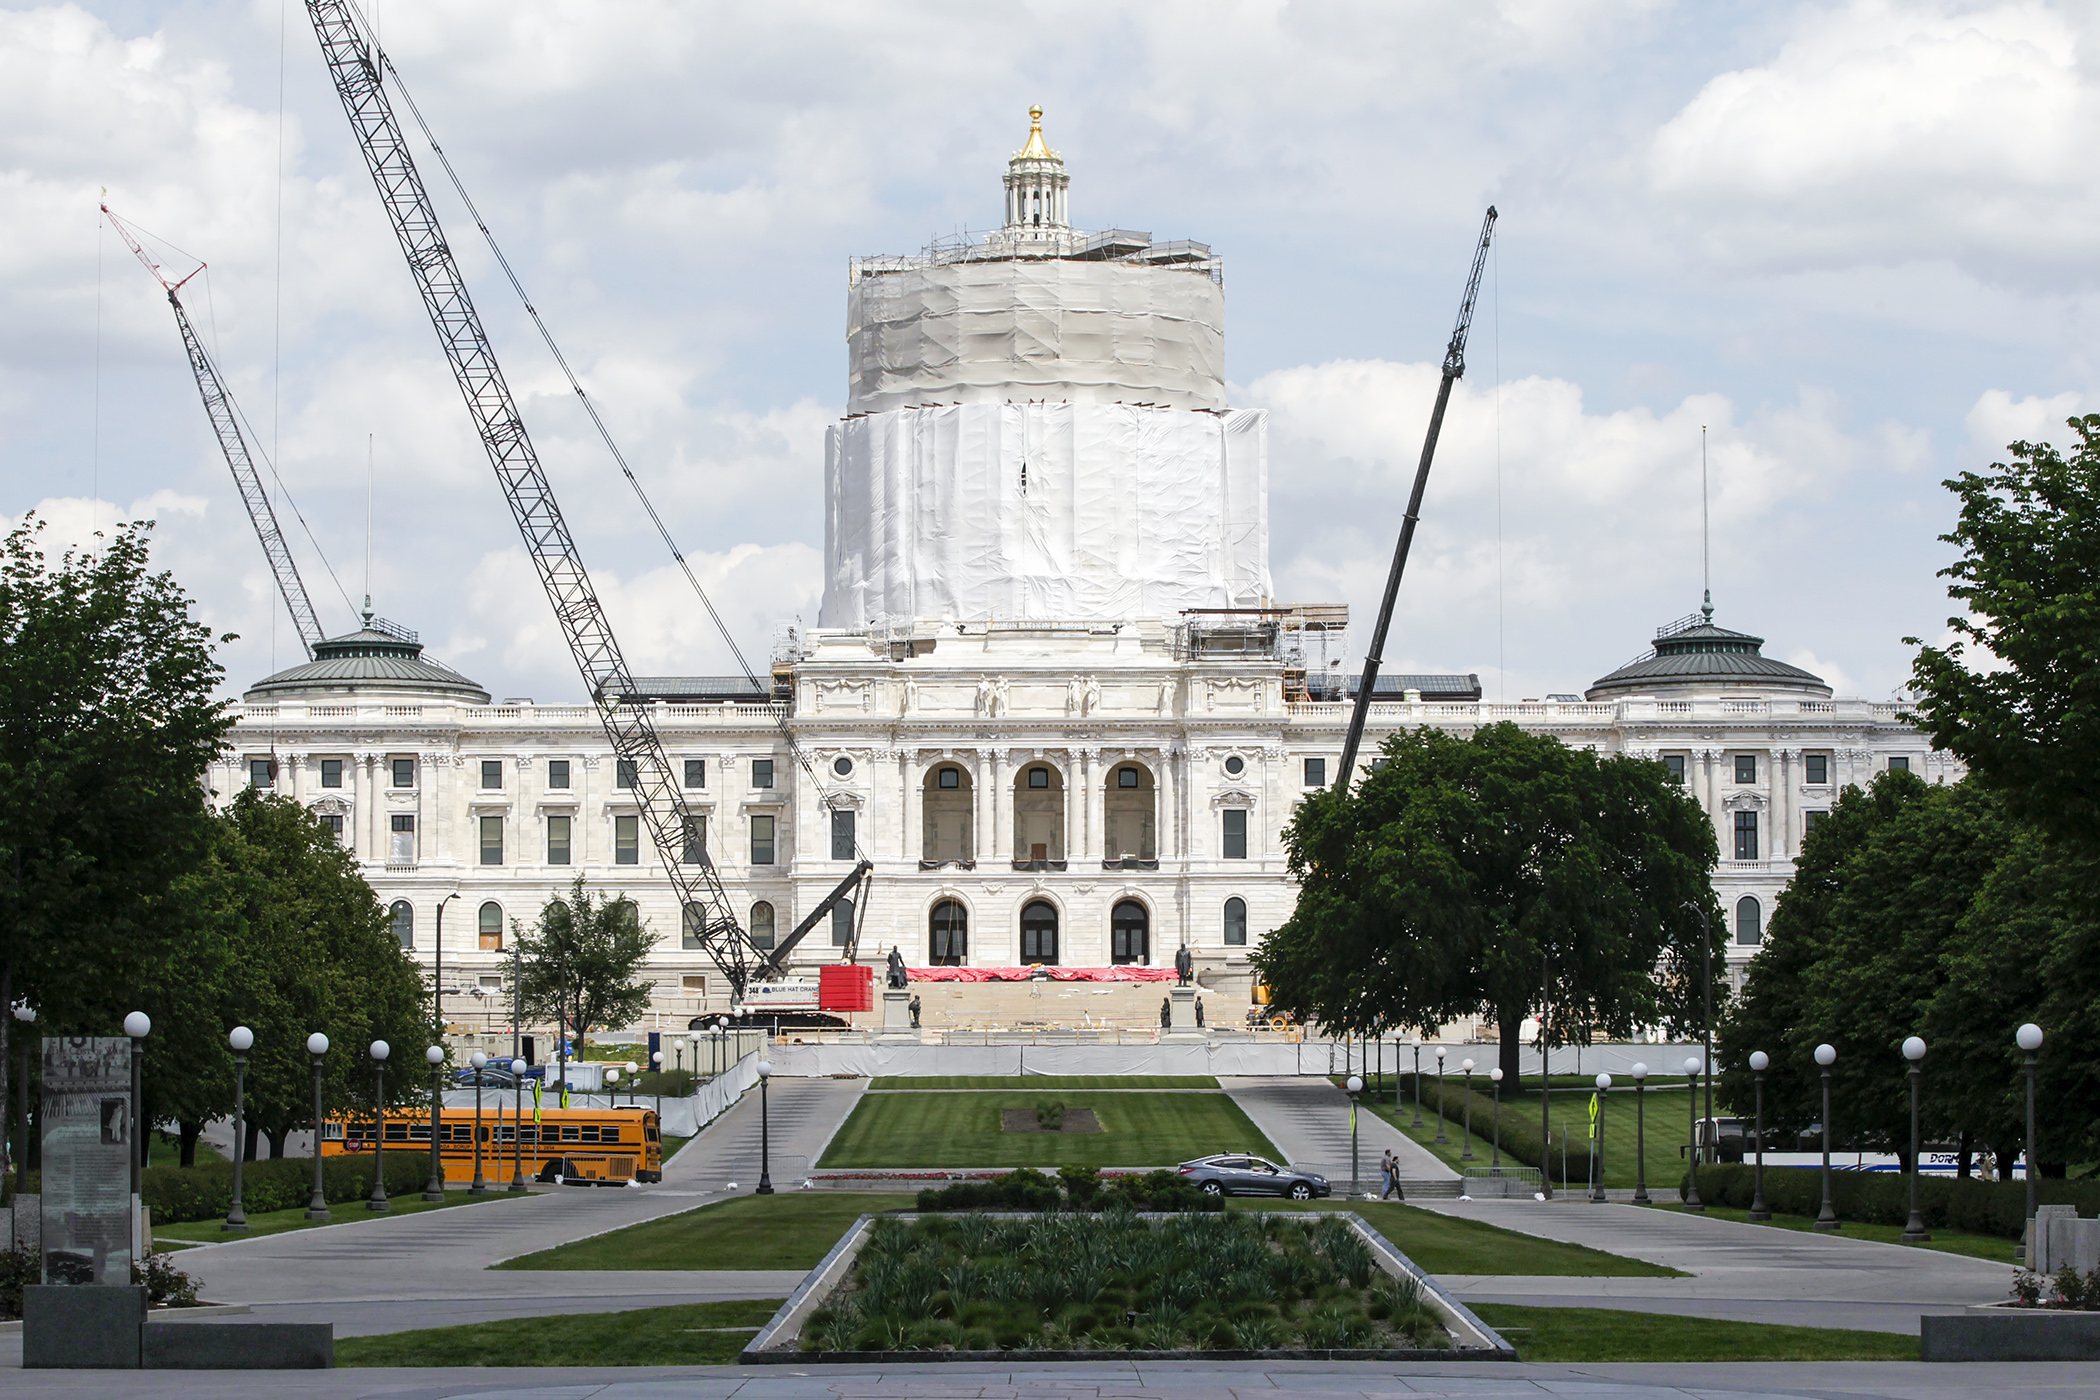 Work continues on the State Capitol restoration, but legislative leaders and Gov. Mark Dayton are struggling to construct an agreement for a special session.